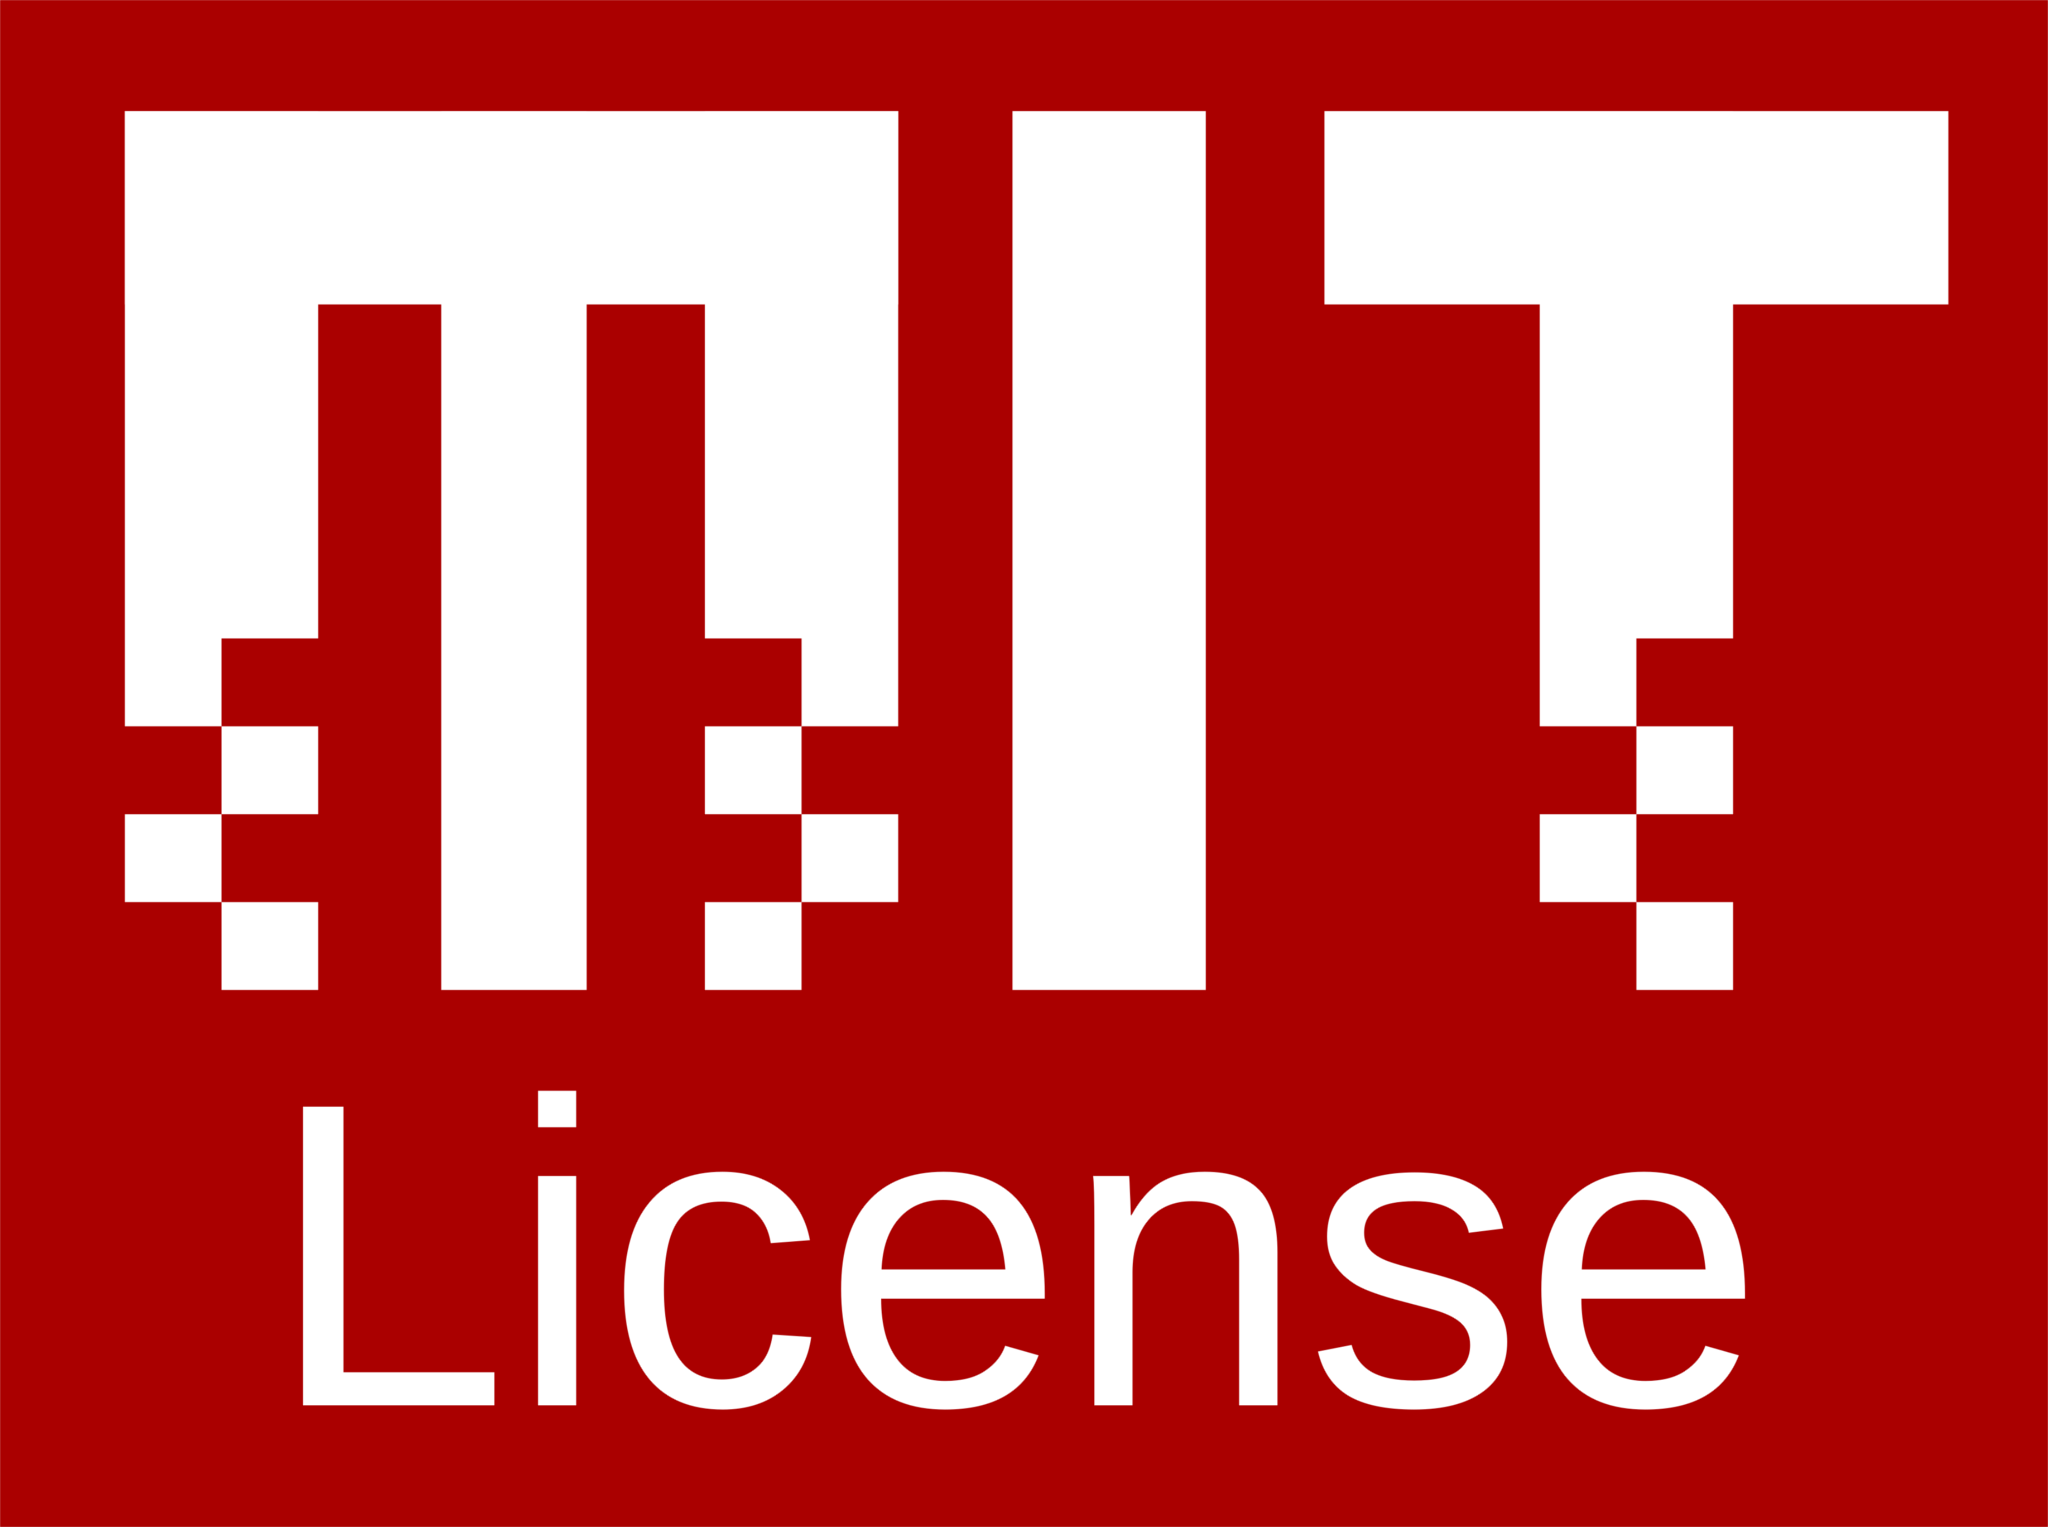 mit_license_red.png